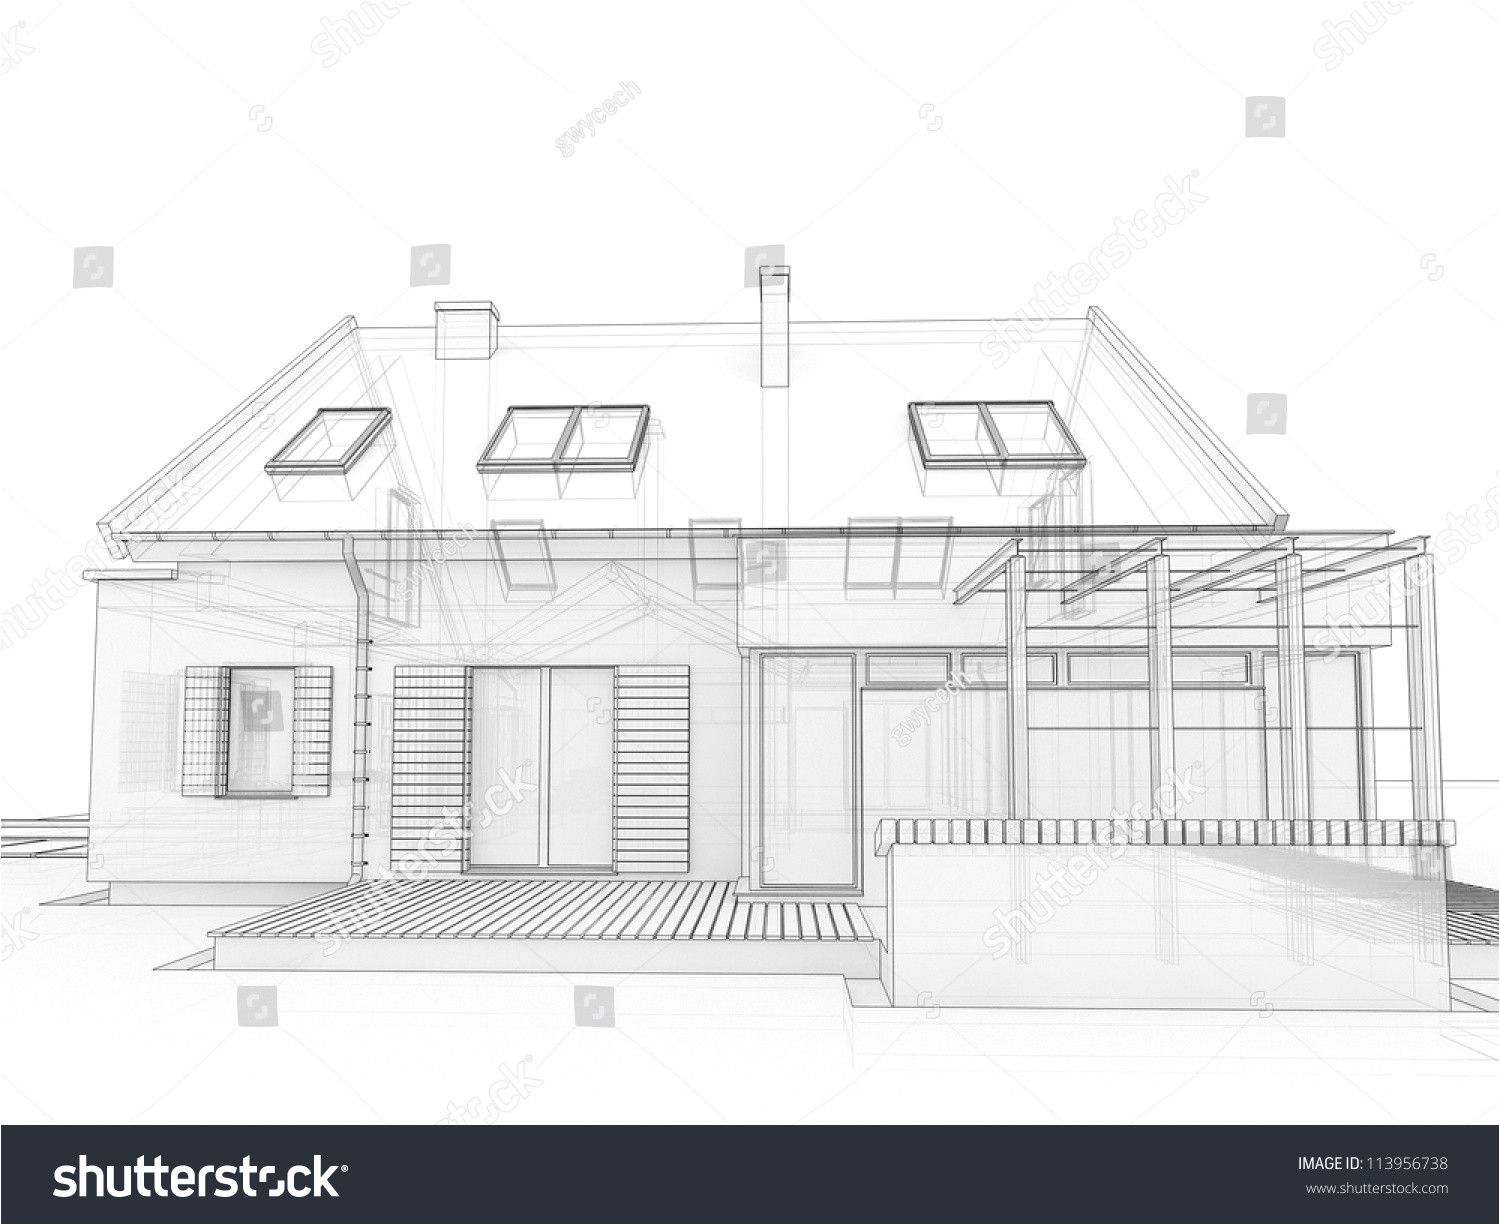 stock photo computer generated transparent house design visualization in drawing style